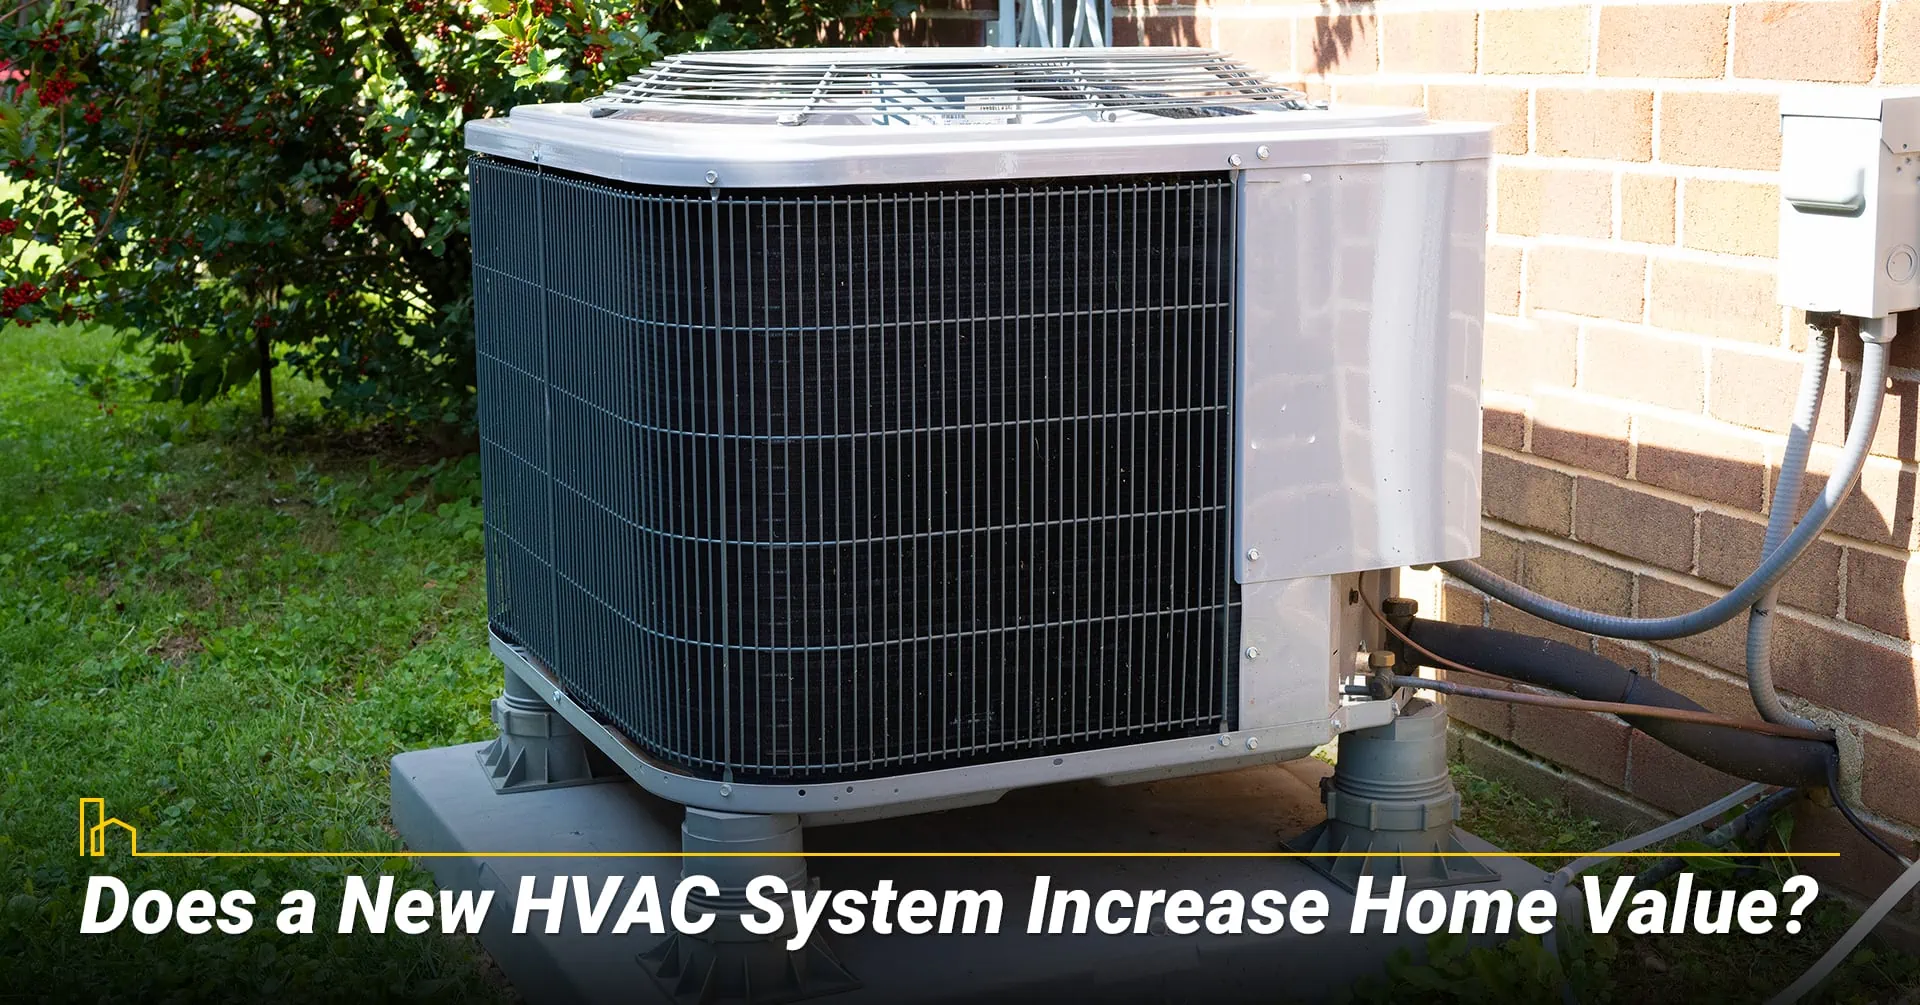 Does a New HVAC System Increase Home Value?